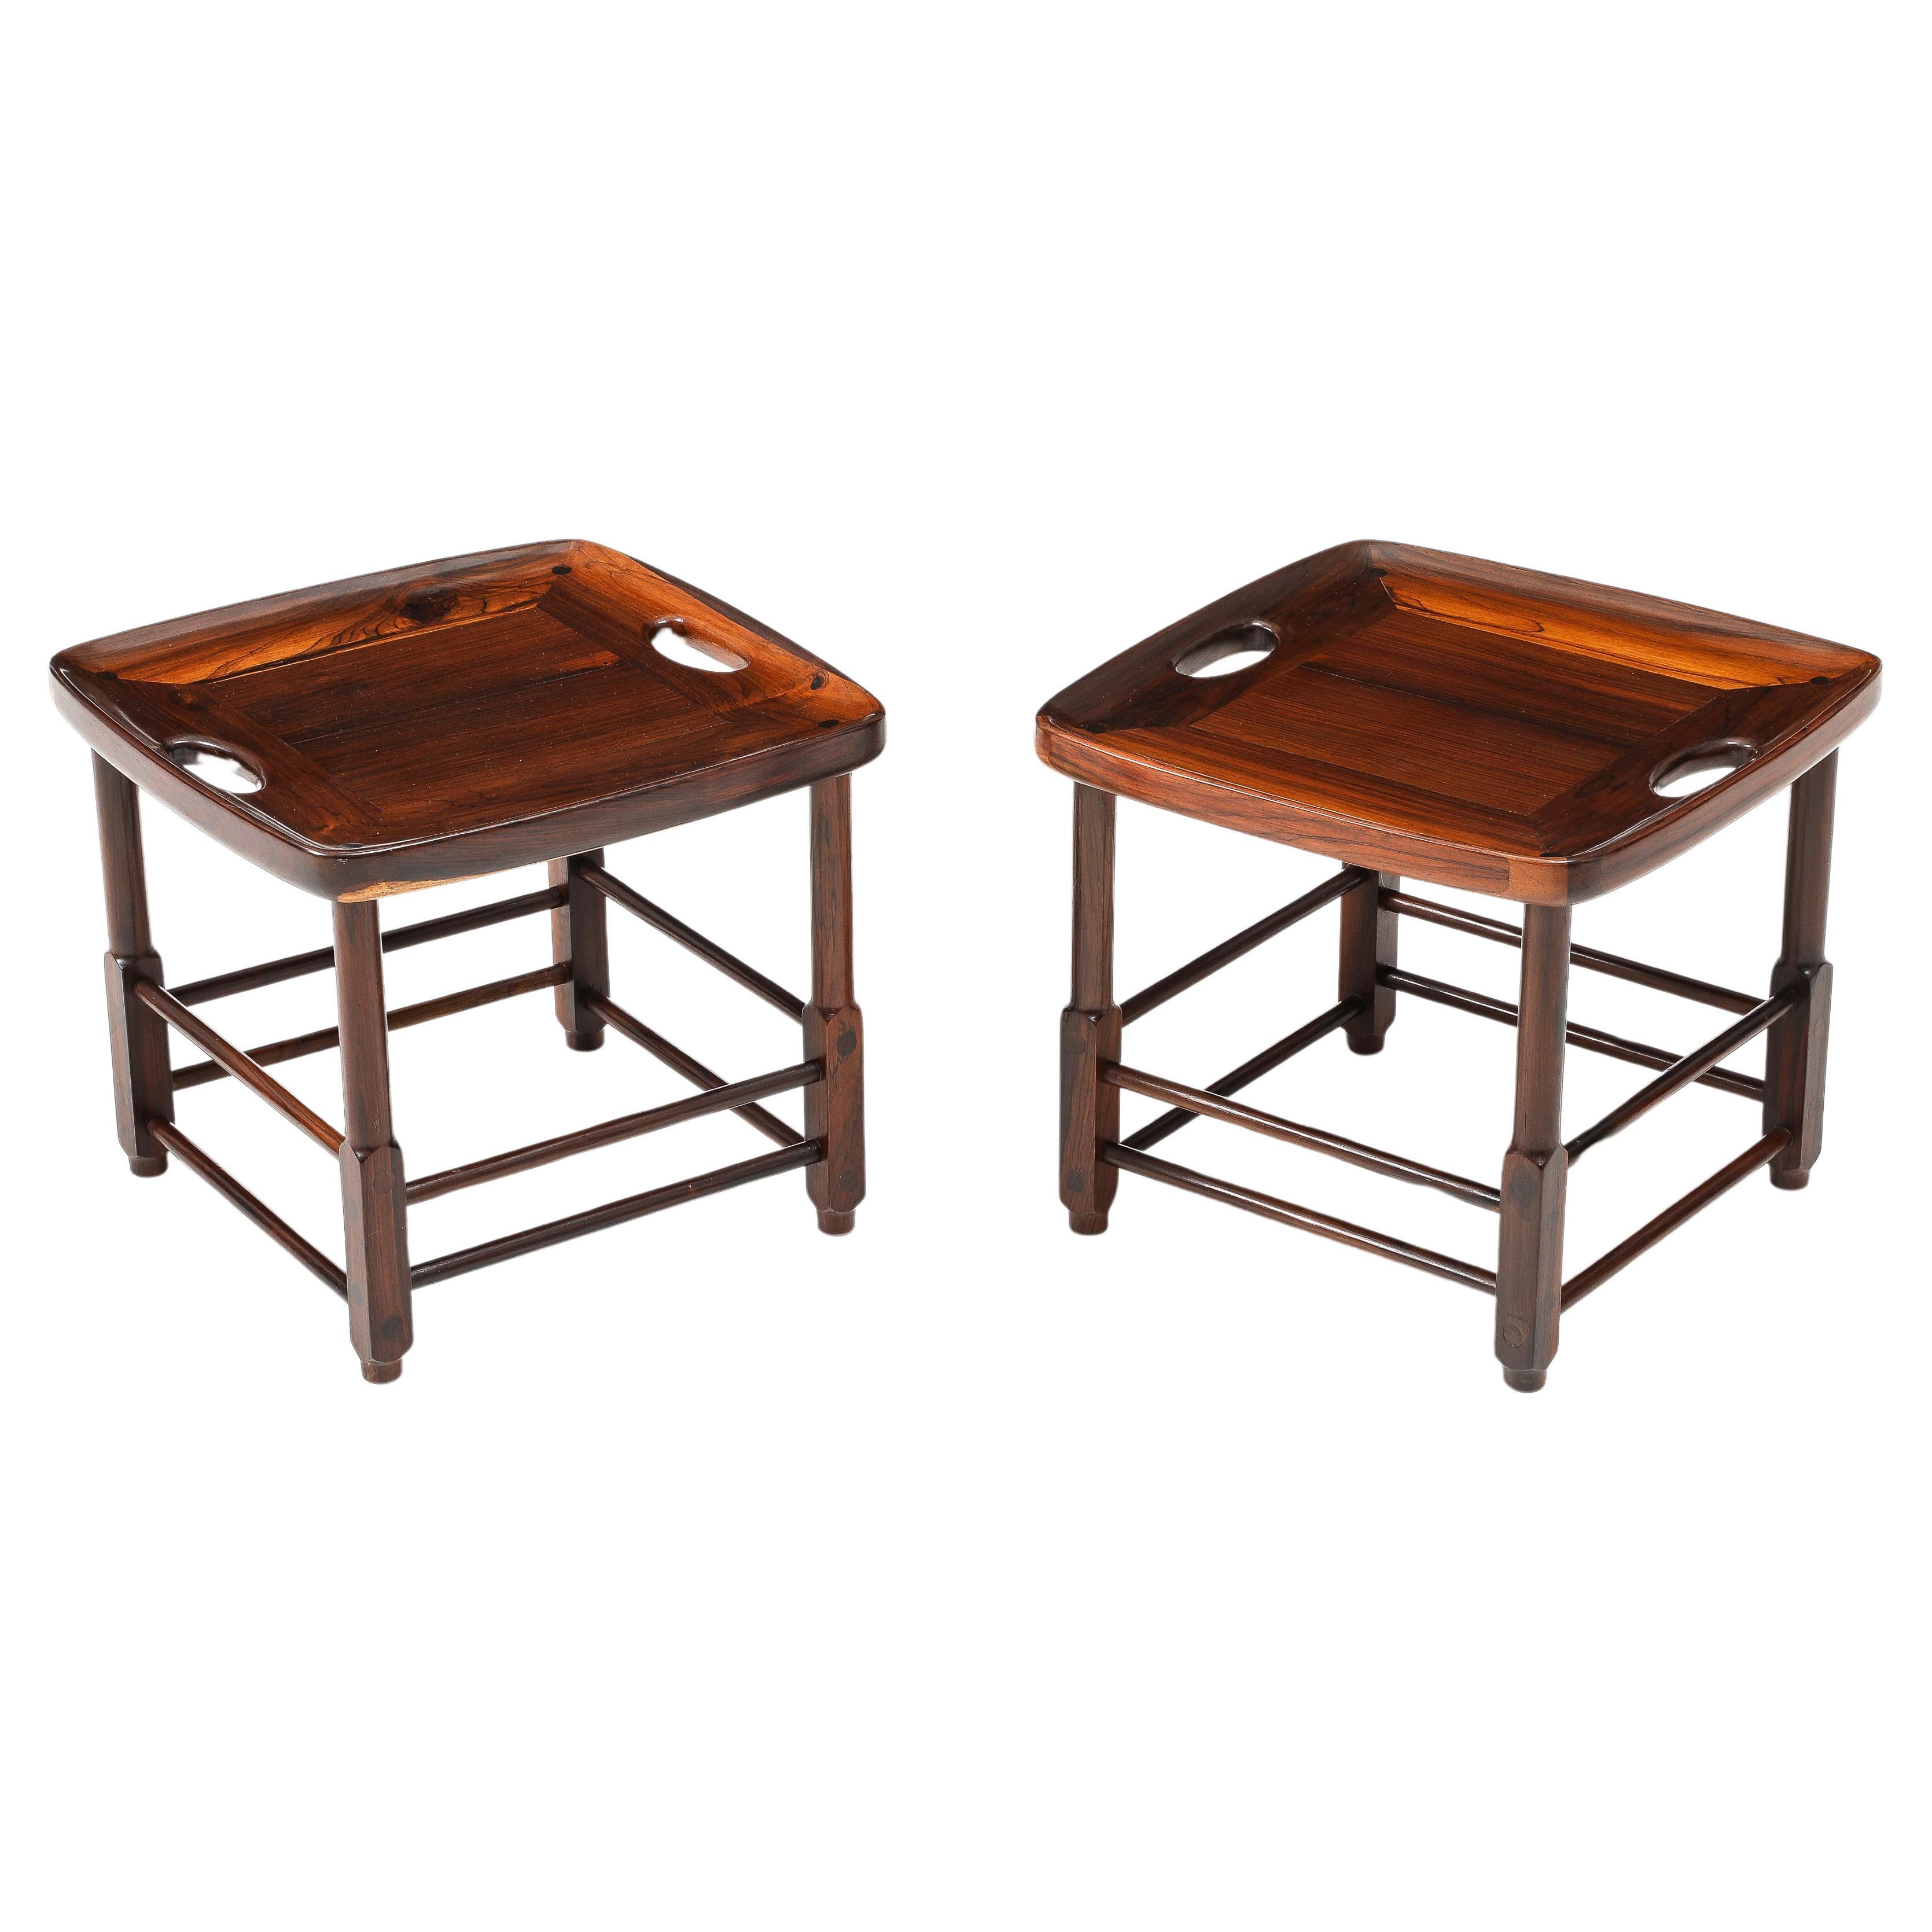 Mid-Century Modern Pair of "Magrini" Stools by Sergio Rodrigues, Brazil, 1960s For Sale